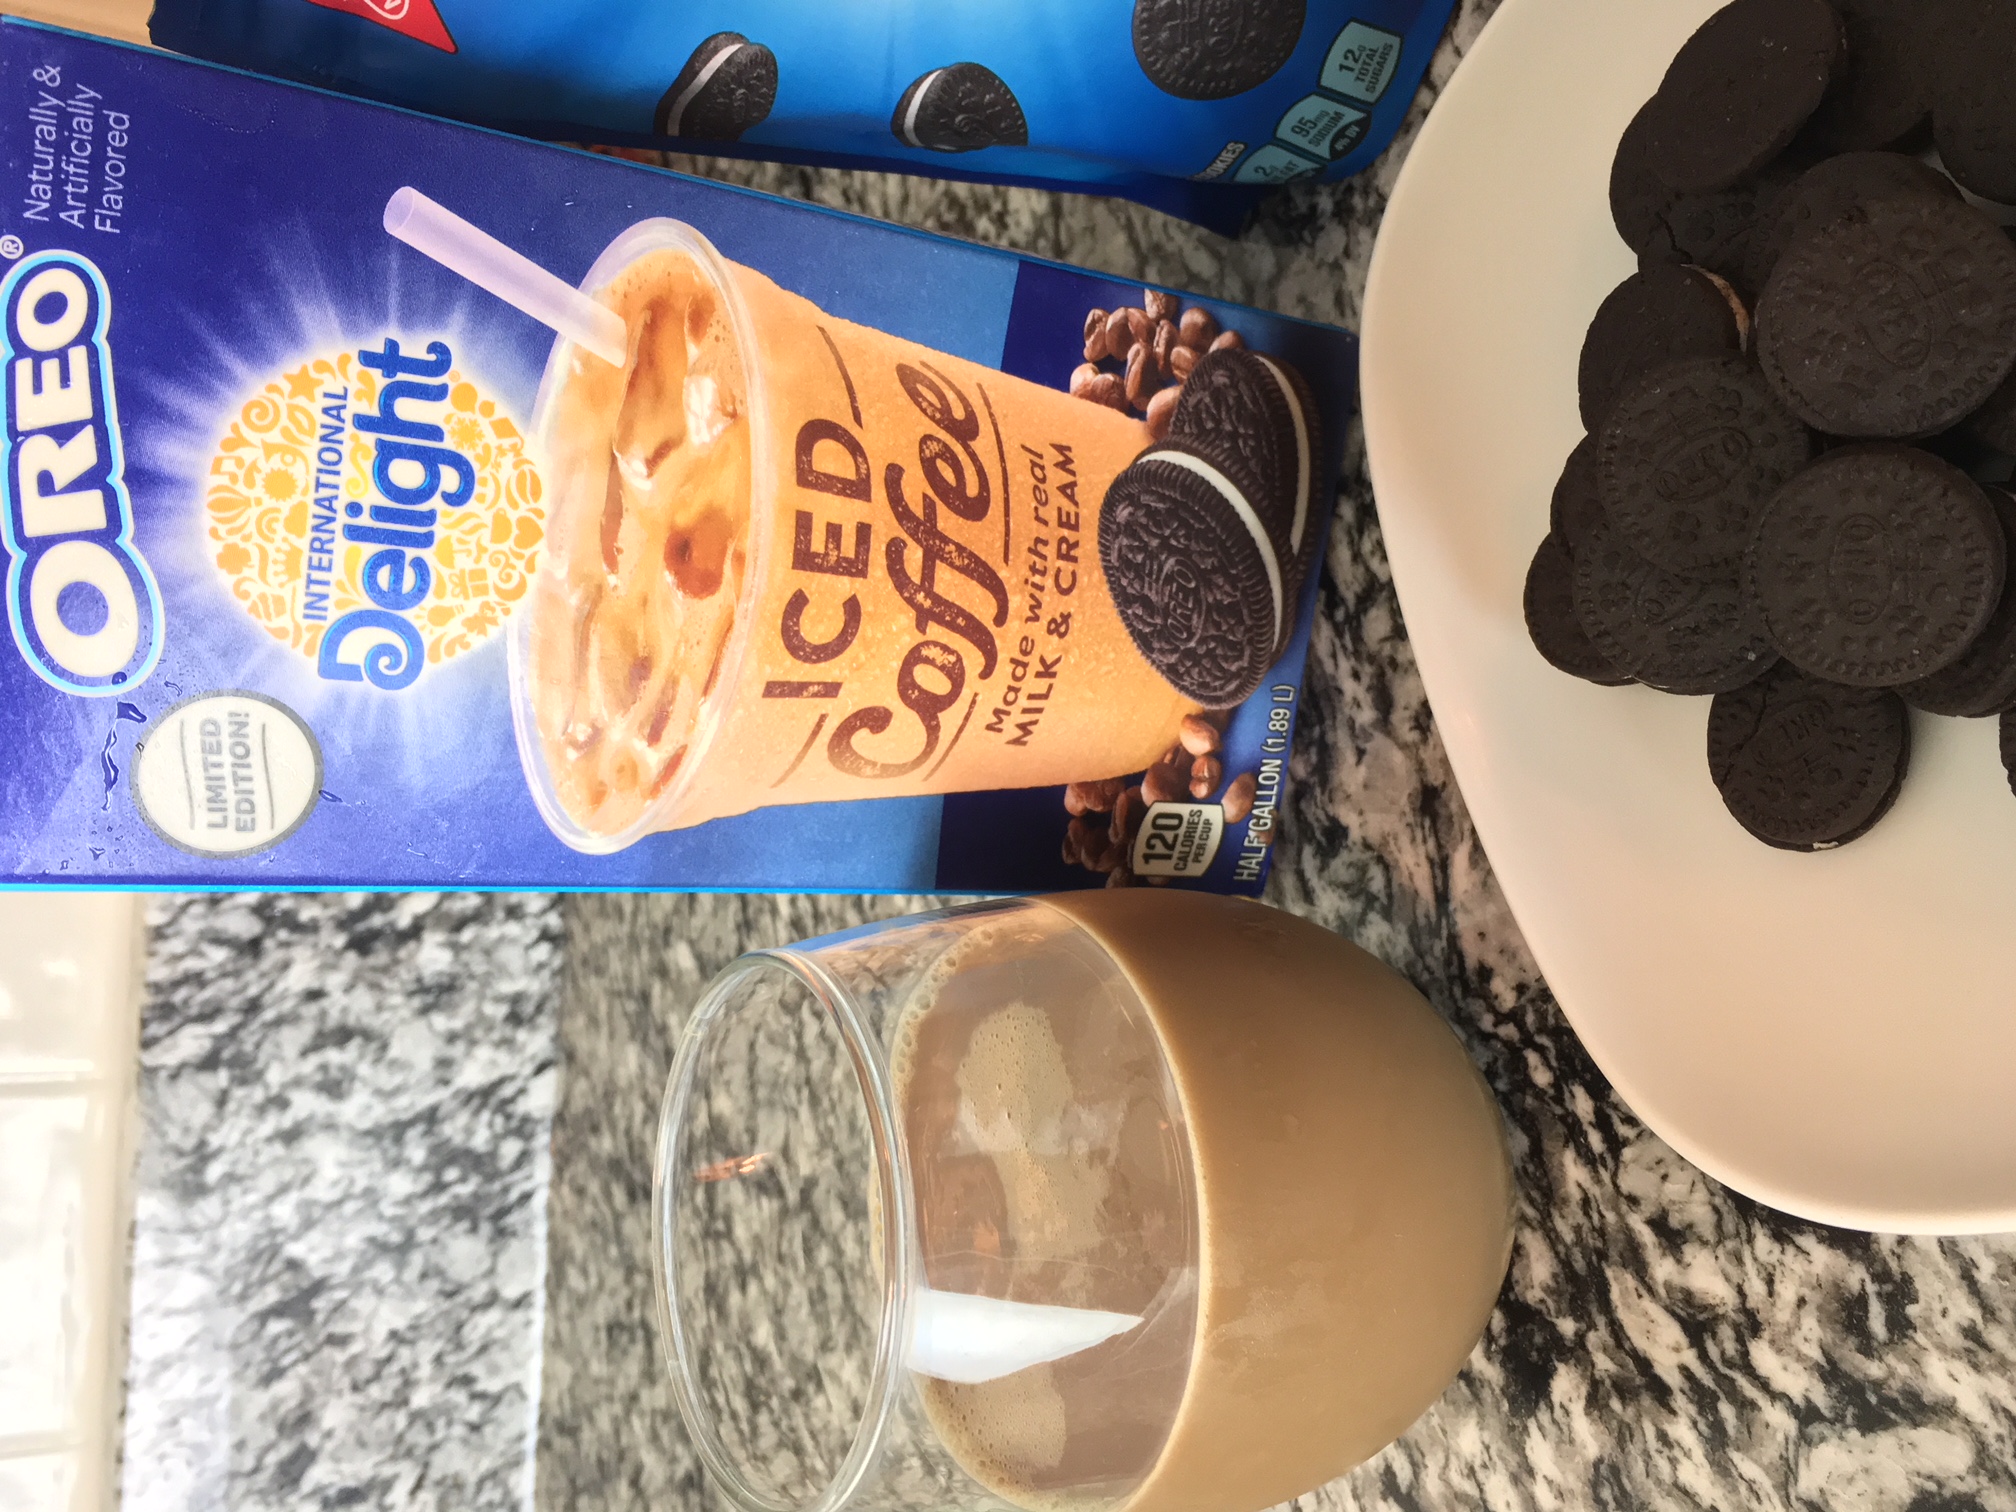 OMG There’s OREO Iced Coffee?!! YES. Enjoying OREO Thin Bites and International Delight OREO Iced Coffee On The Go – Coupon Included via @YourLifeAfter25